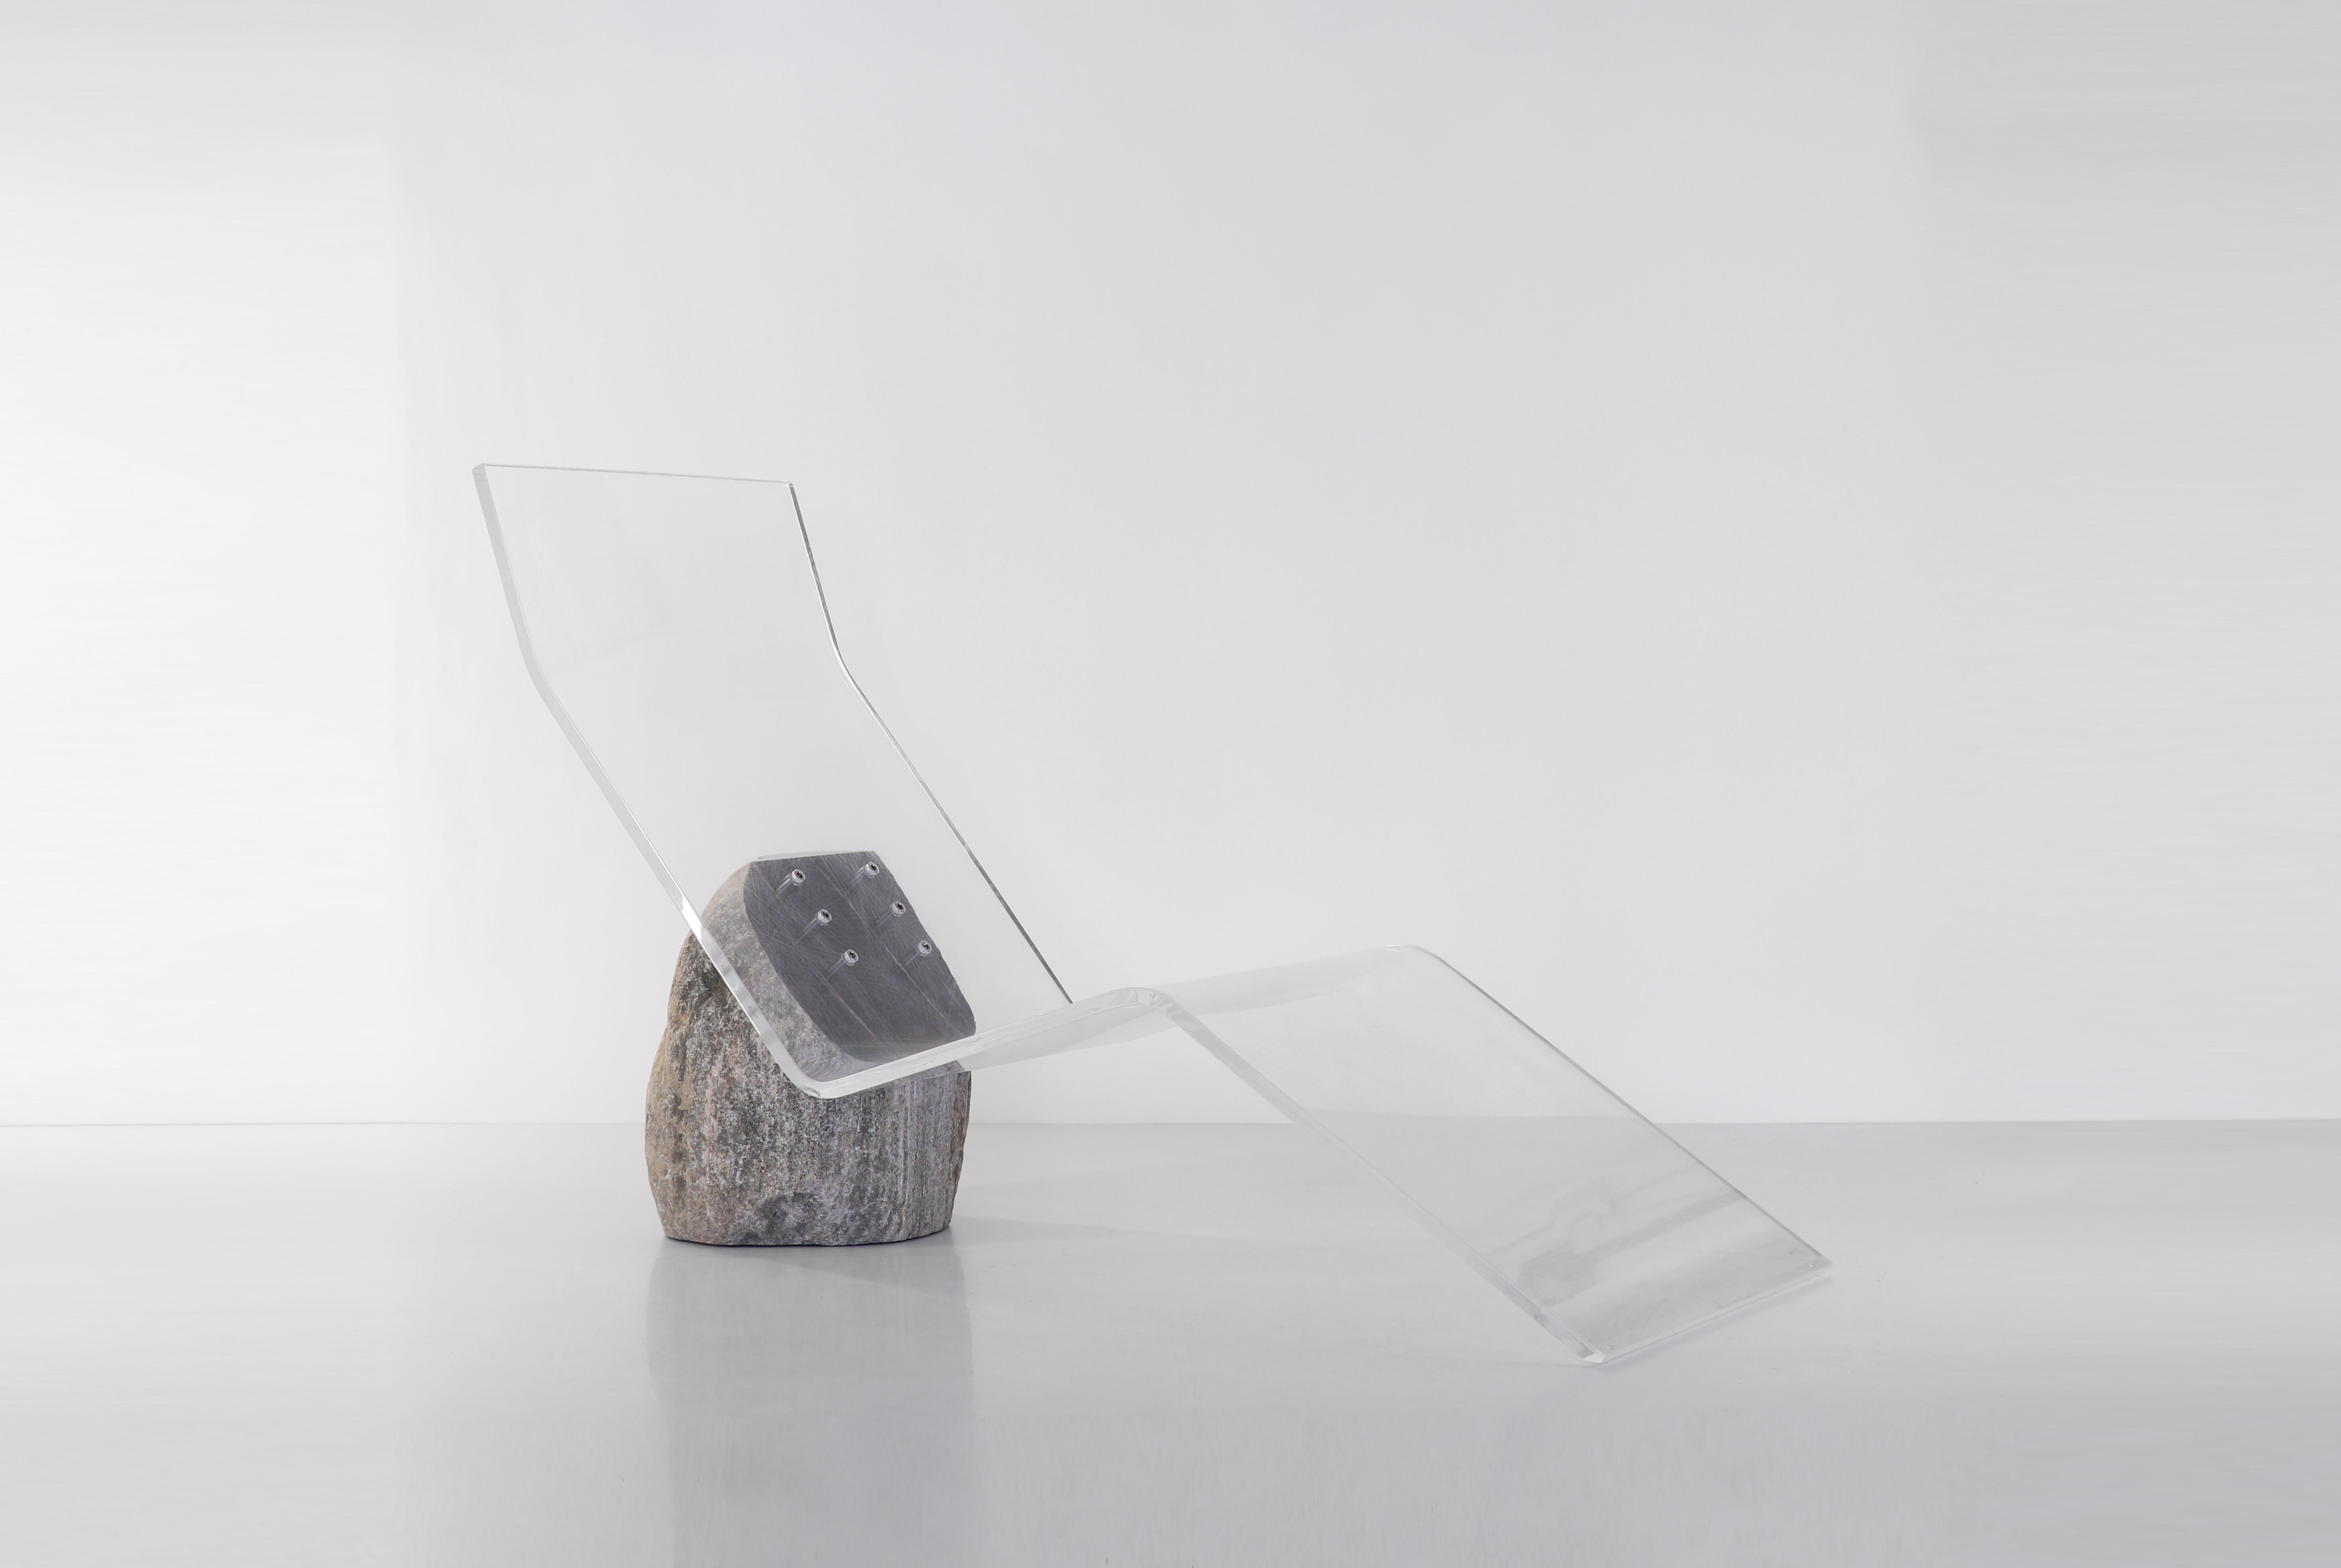 Elsewhere acrylic chaise by Batten and Kamp
Dimensions: W170 x D 53 x H100 cm
Materials: acrylic, granite stone, stainless steel fixings.

Elsewhere will be exhibited throughout December and January at Novalis Art Design in Hong Kong’s cultural